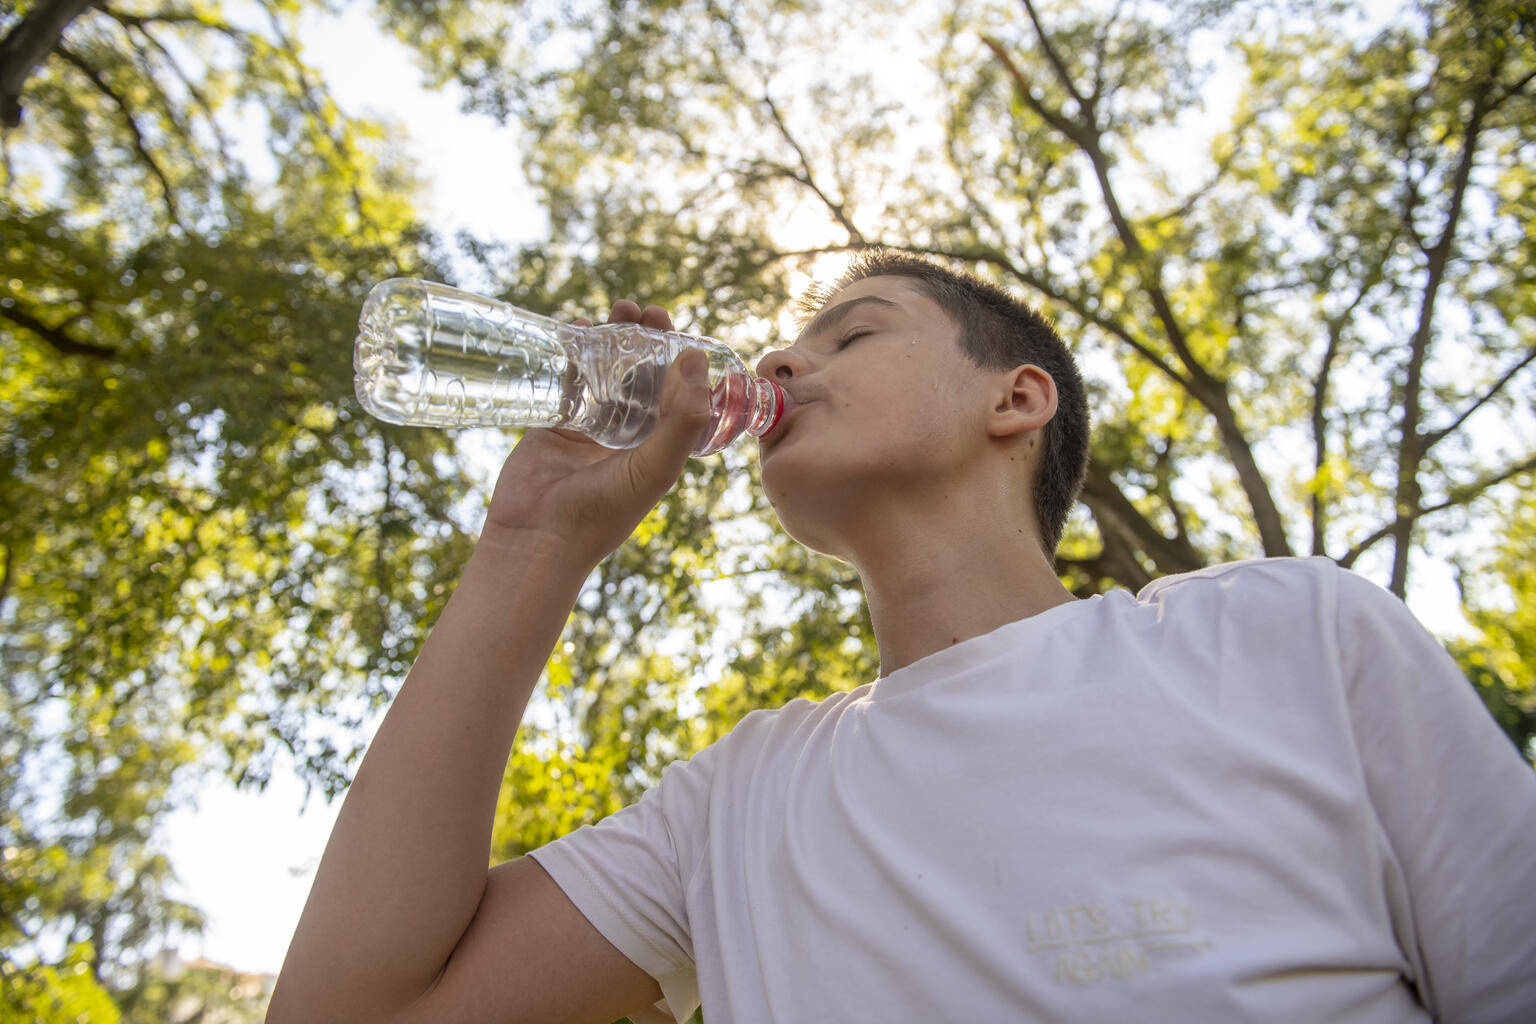 Milan Nikolic 12 drinks water after during sunny day in Serbia